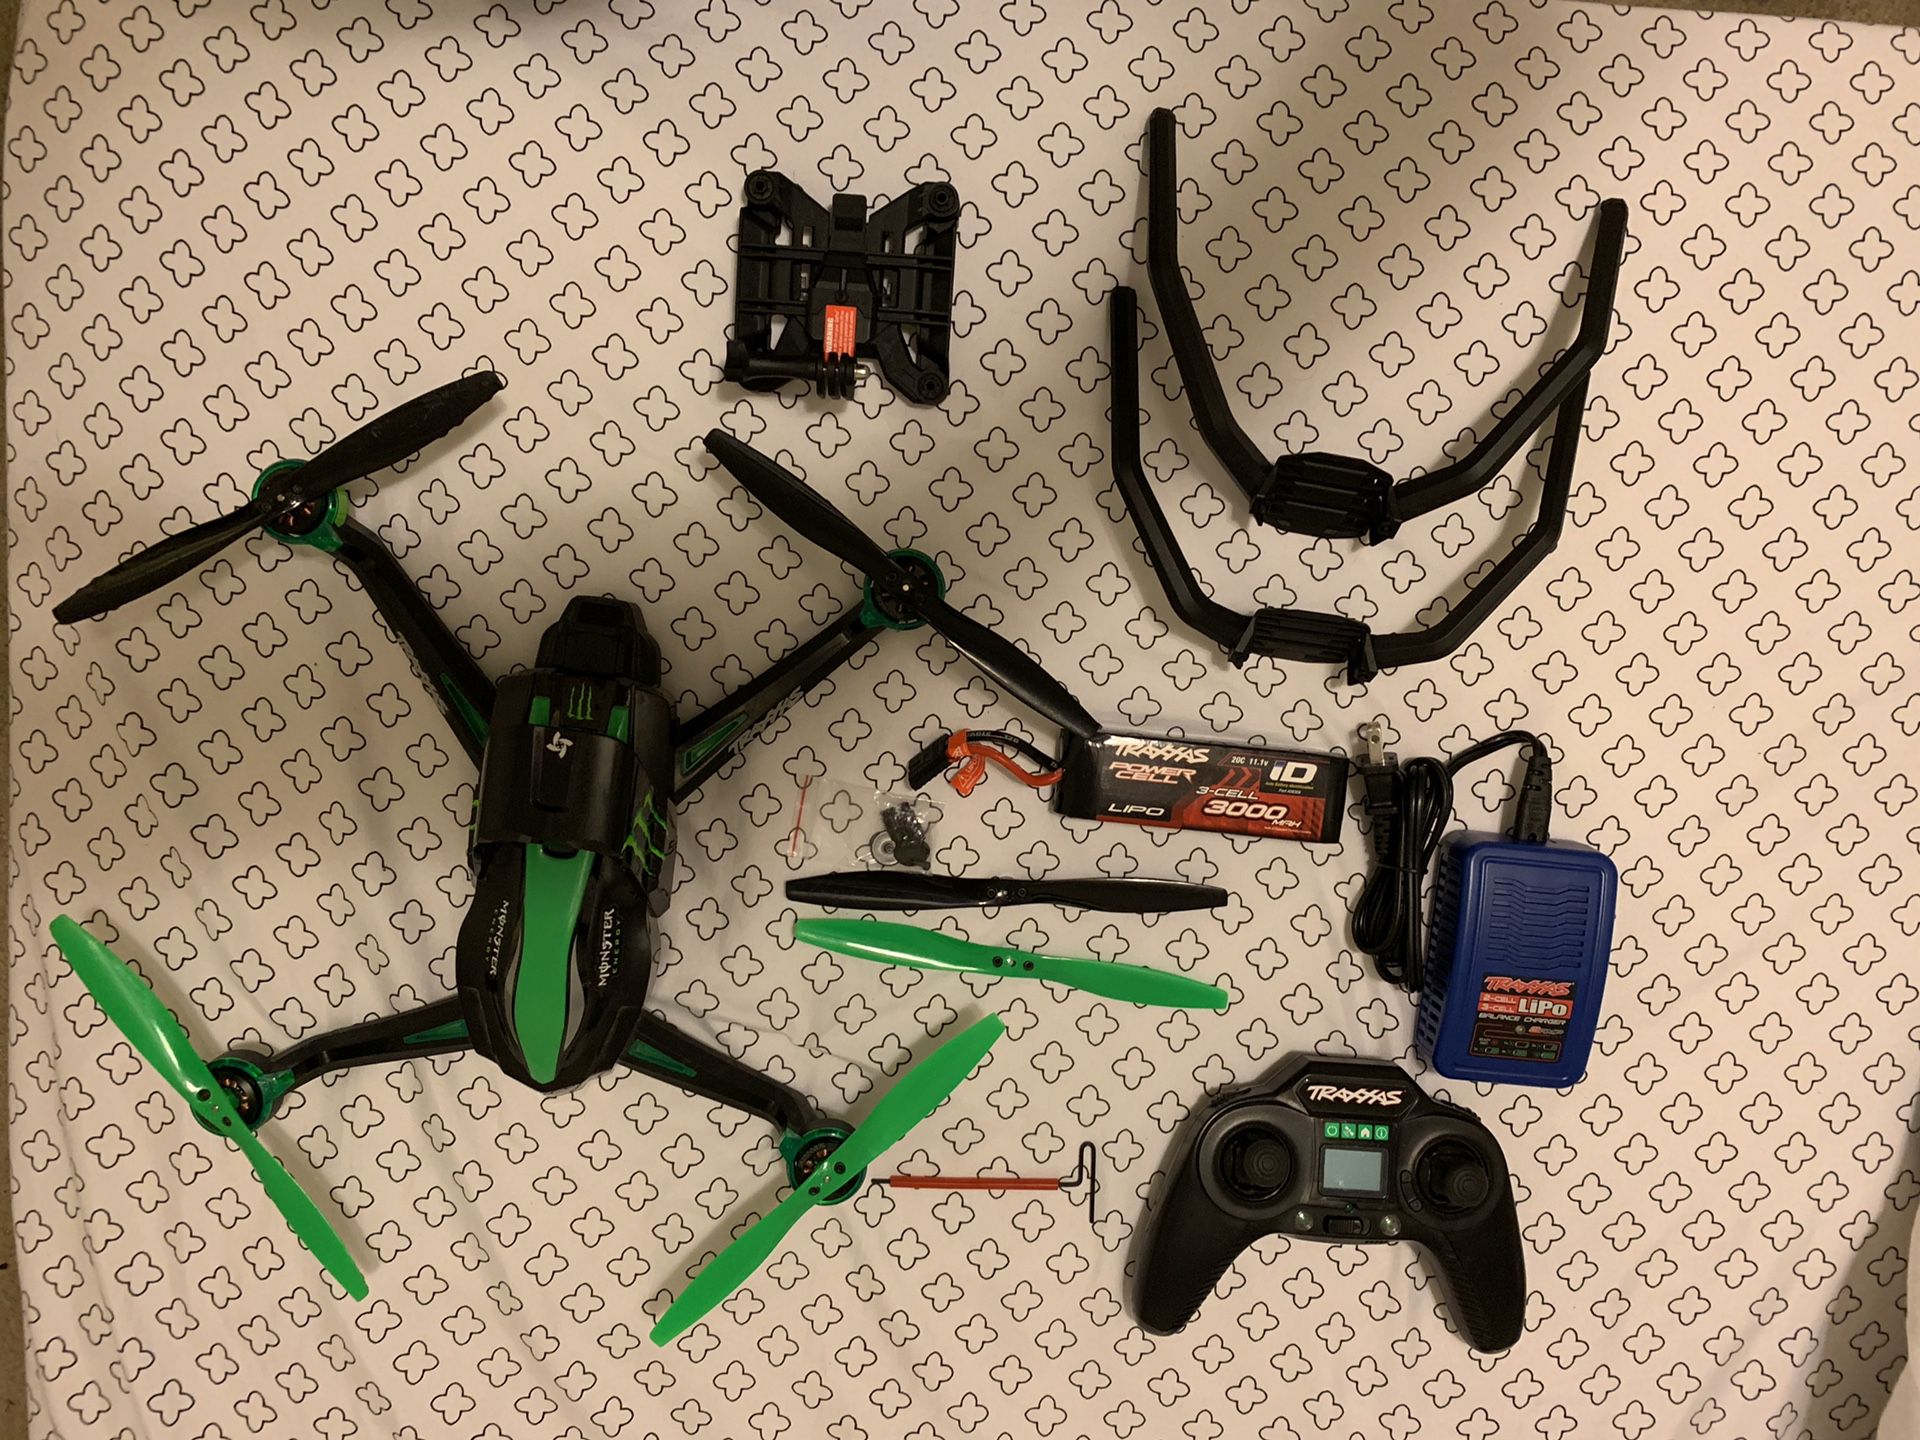 Limited Edition Monster Traxxas Drone